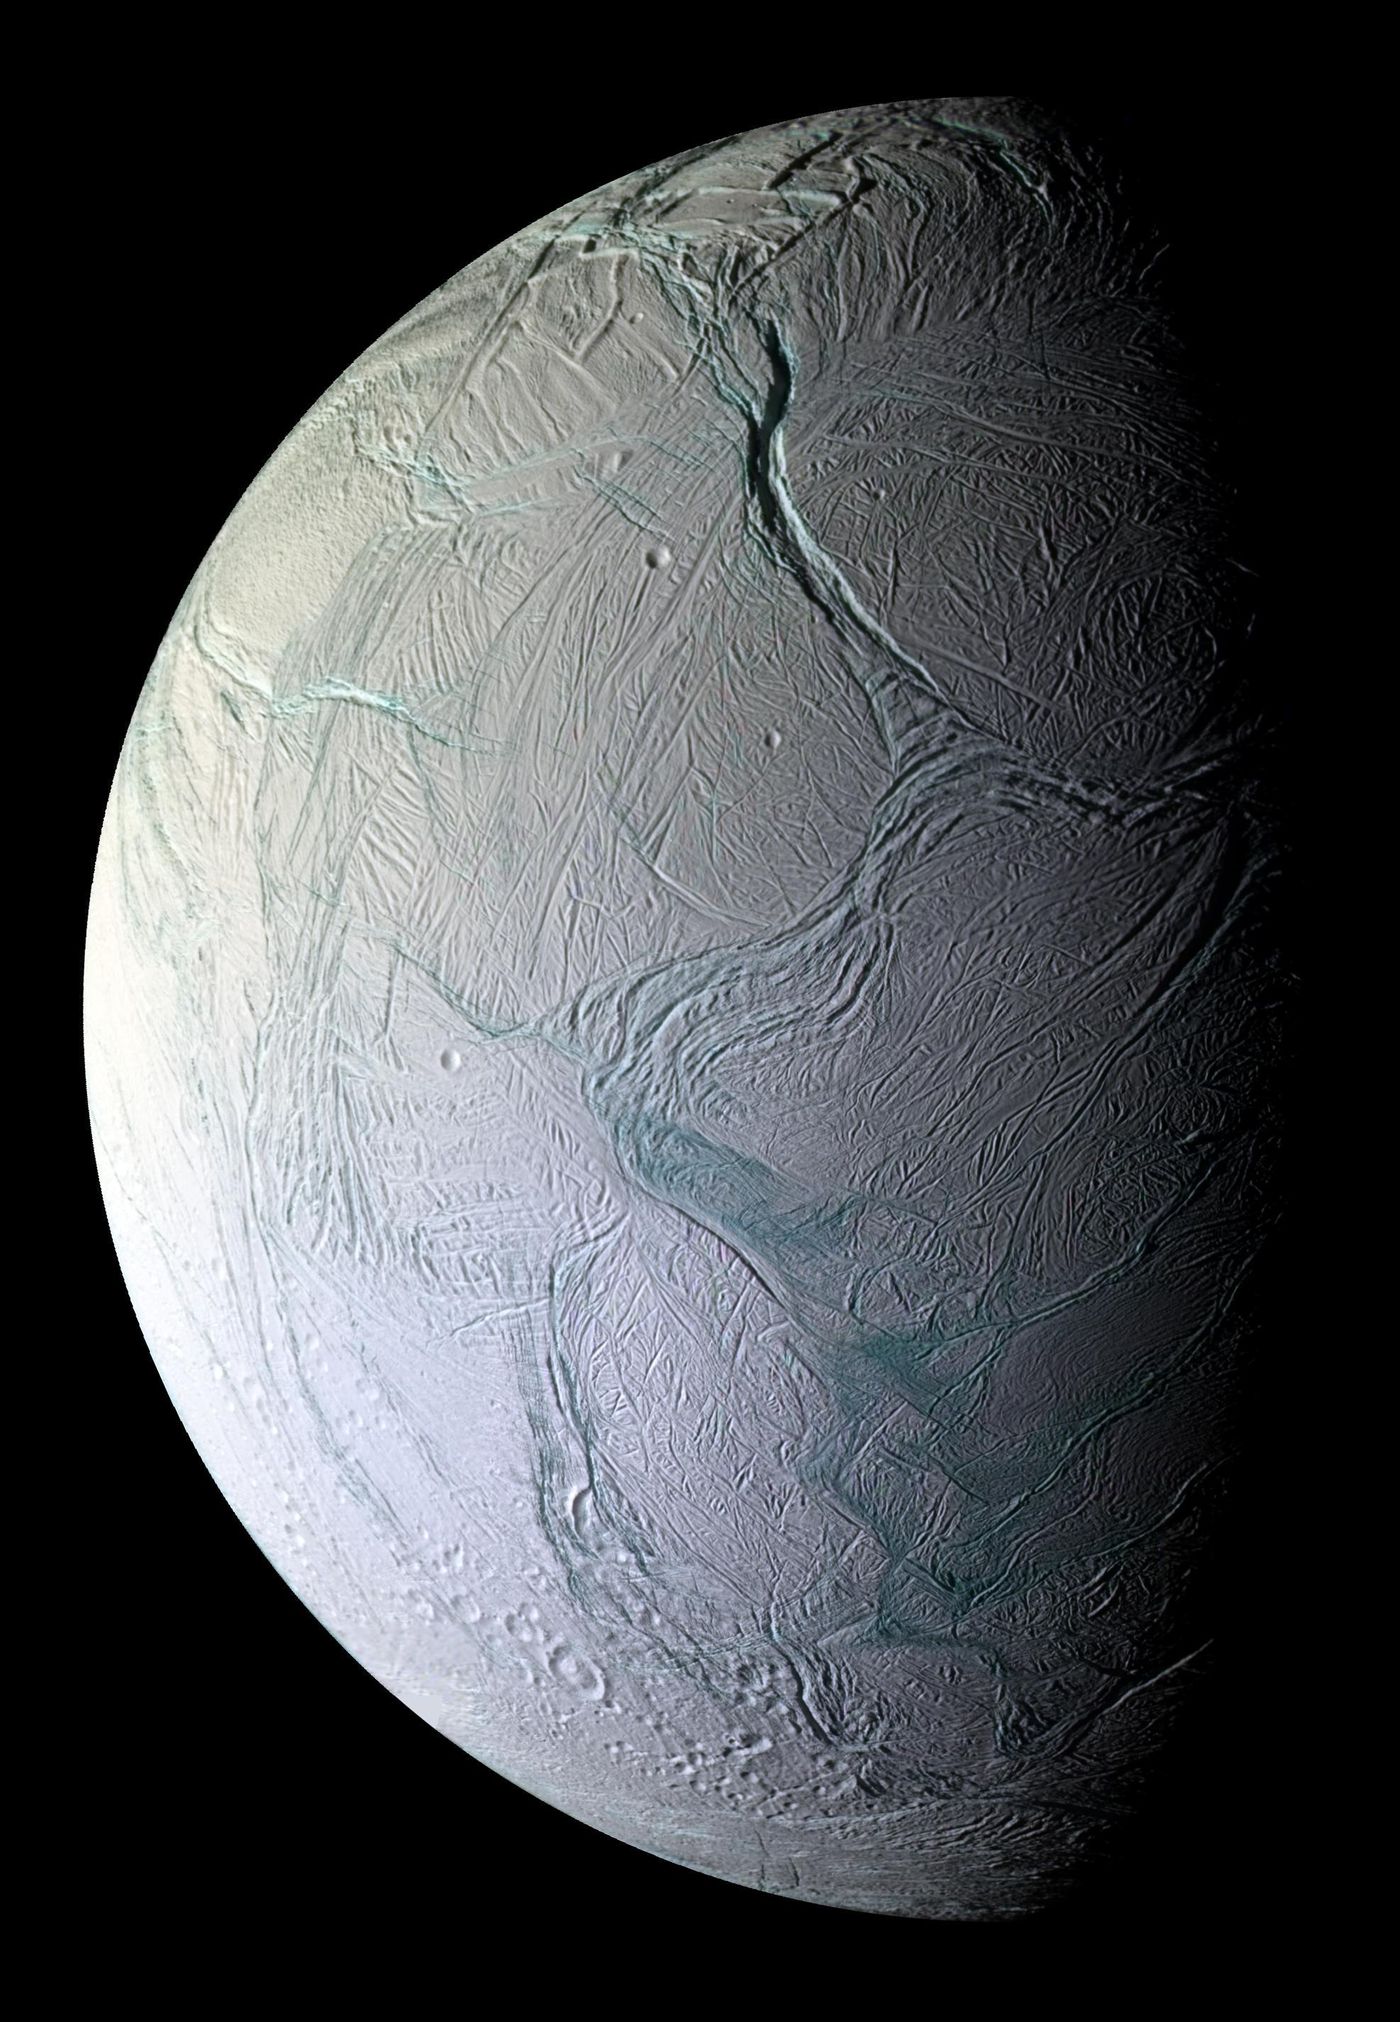 On Oct. 9, 2008, just after coming within 25 kilometers (15.6 miles) of the surface of Enceladus, NASA's Cassini captured this stunning mosaic as the spacecraft sped away from this geologically active moon of Saturn. Image Credit: NASA/JPL/Space Science Institute